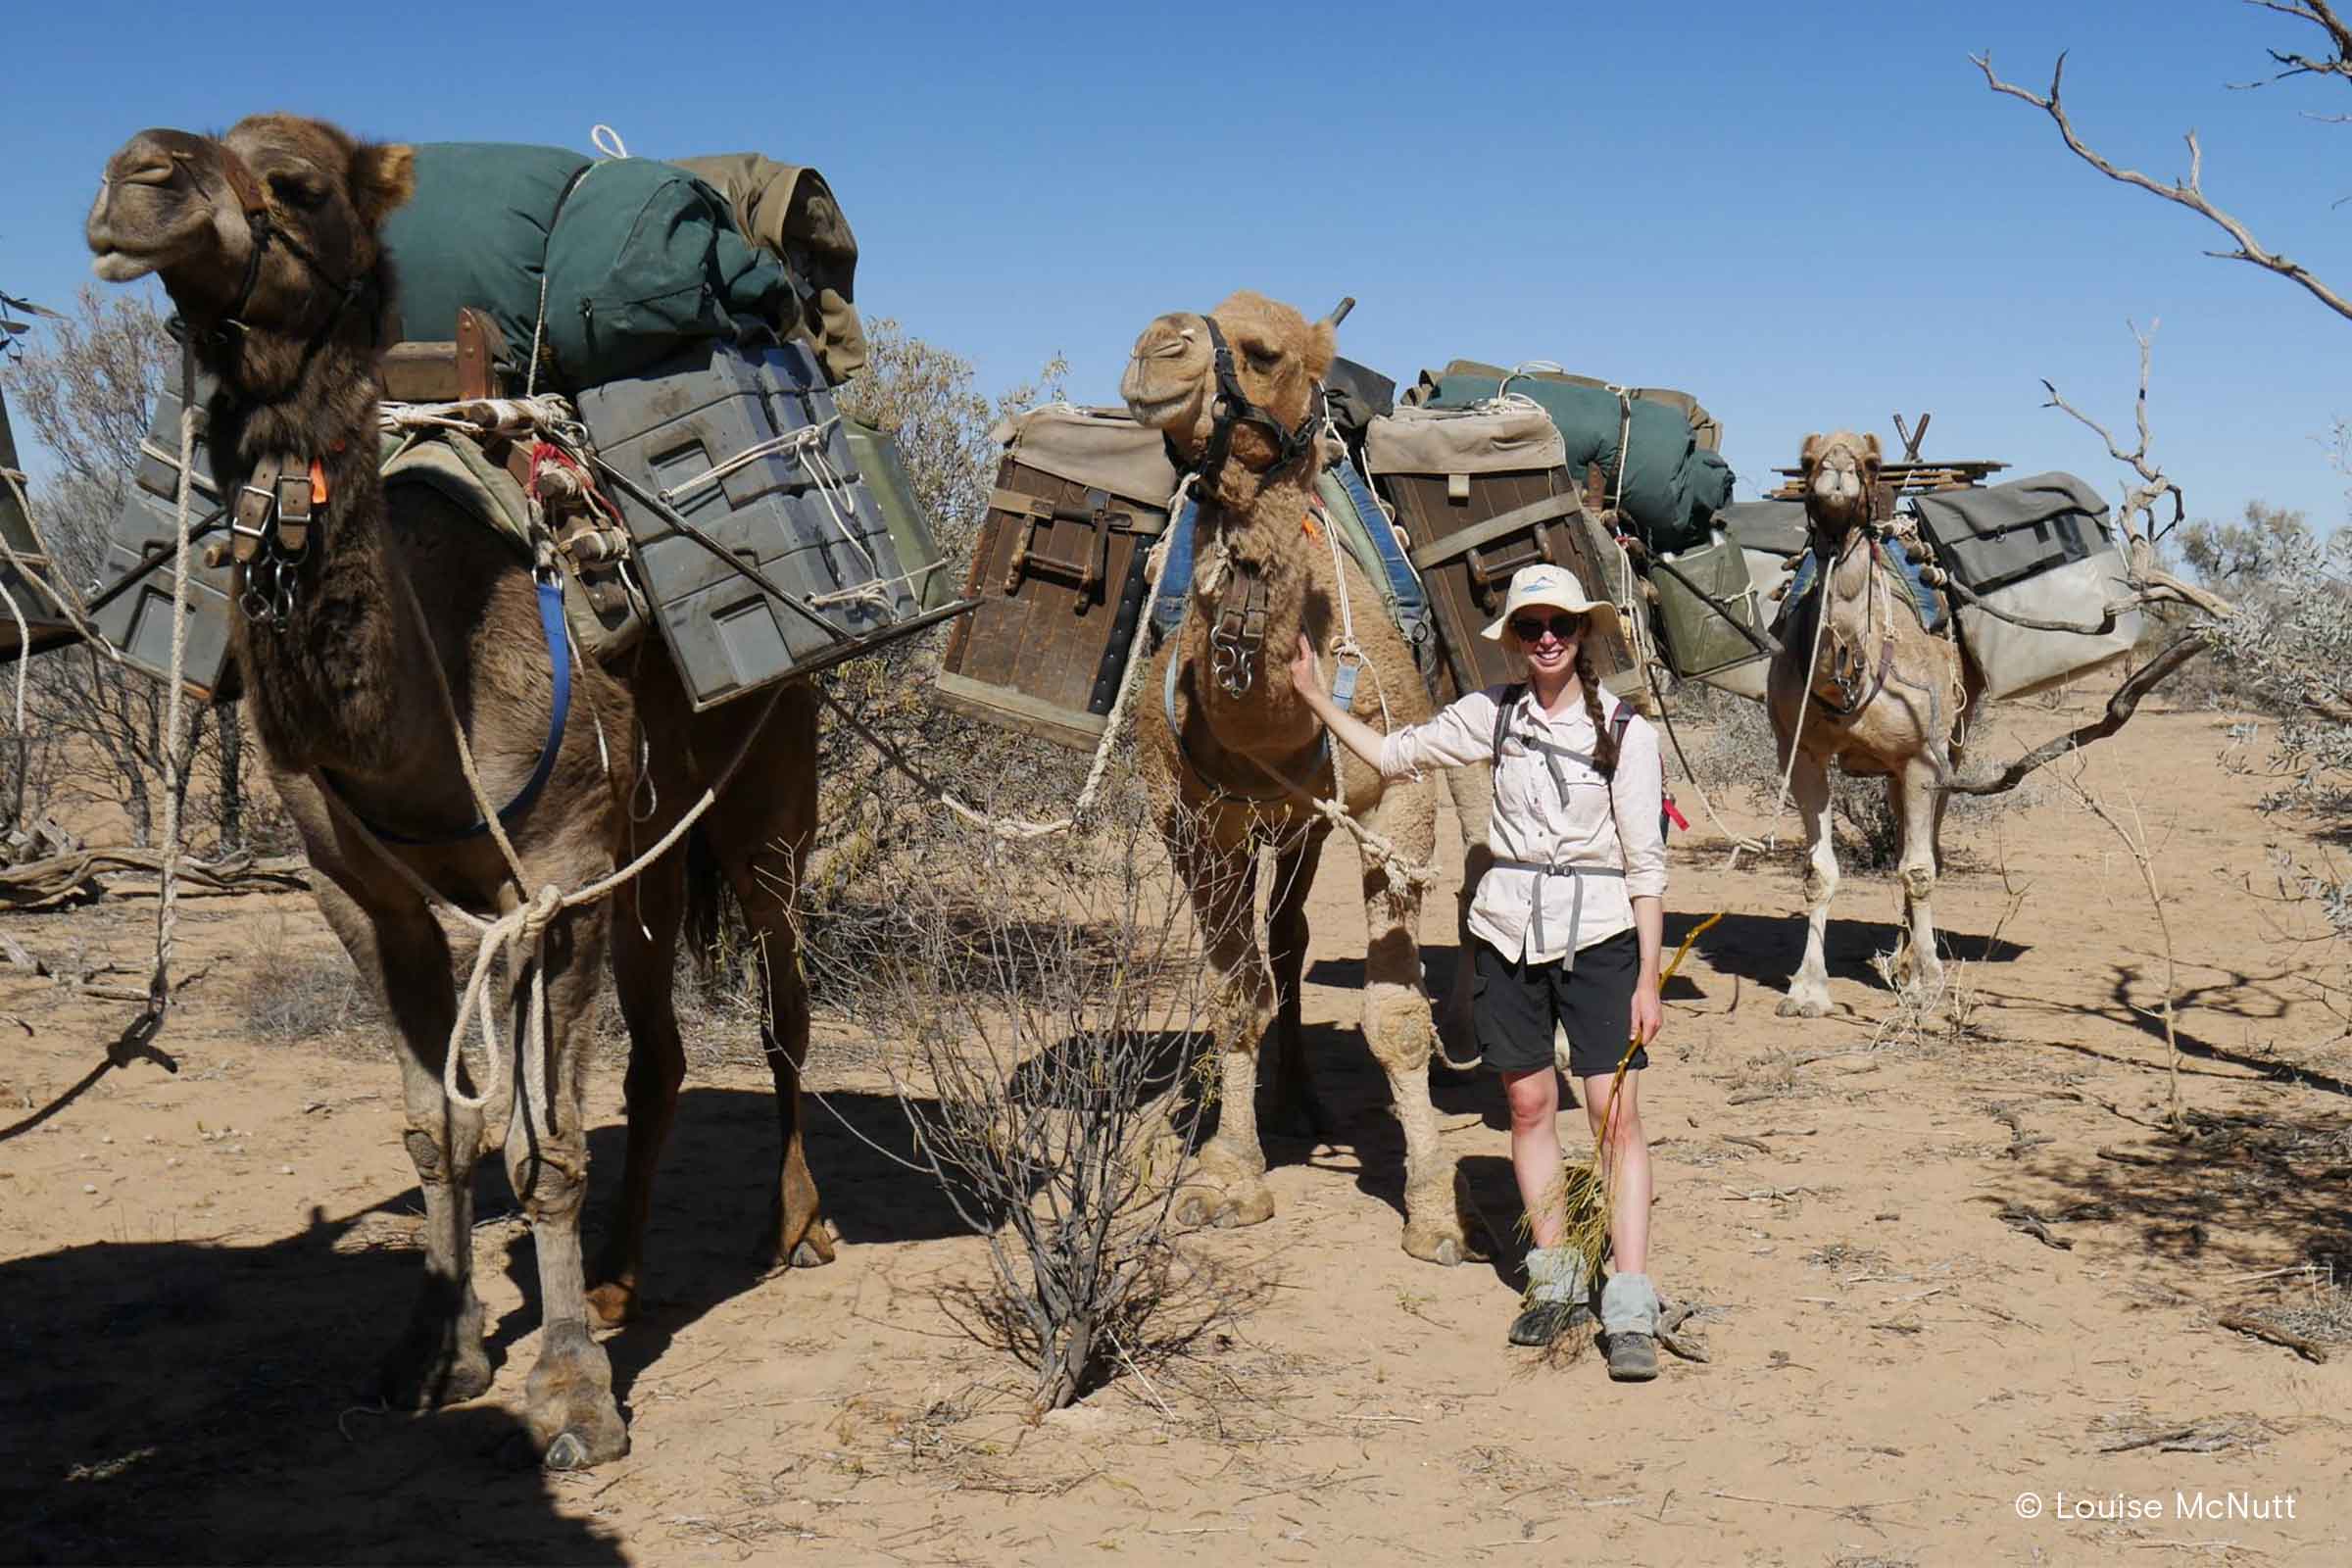 Charles Sturt student with camels in the desert on a fieldwork trip